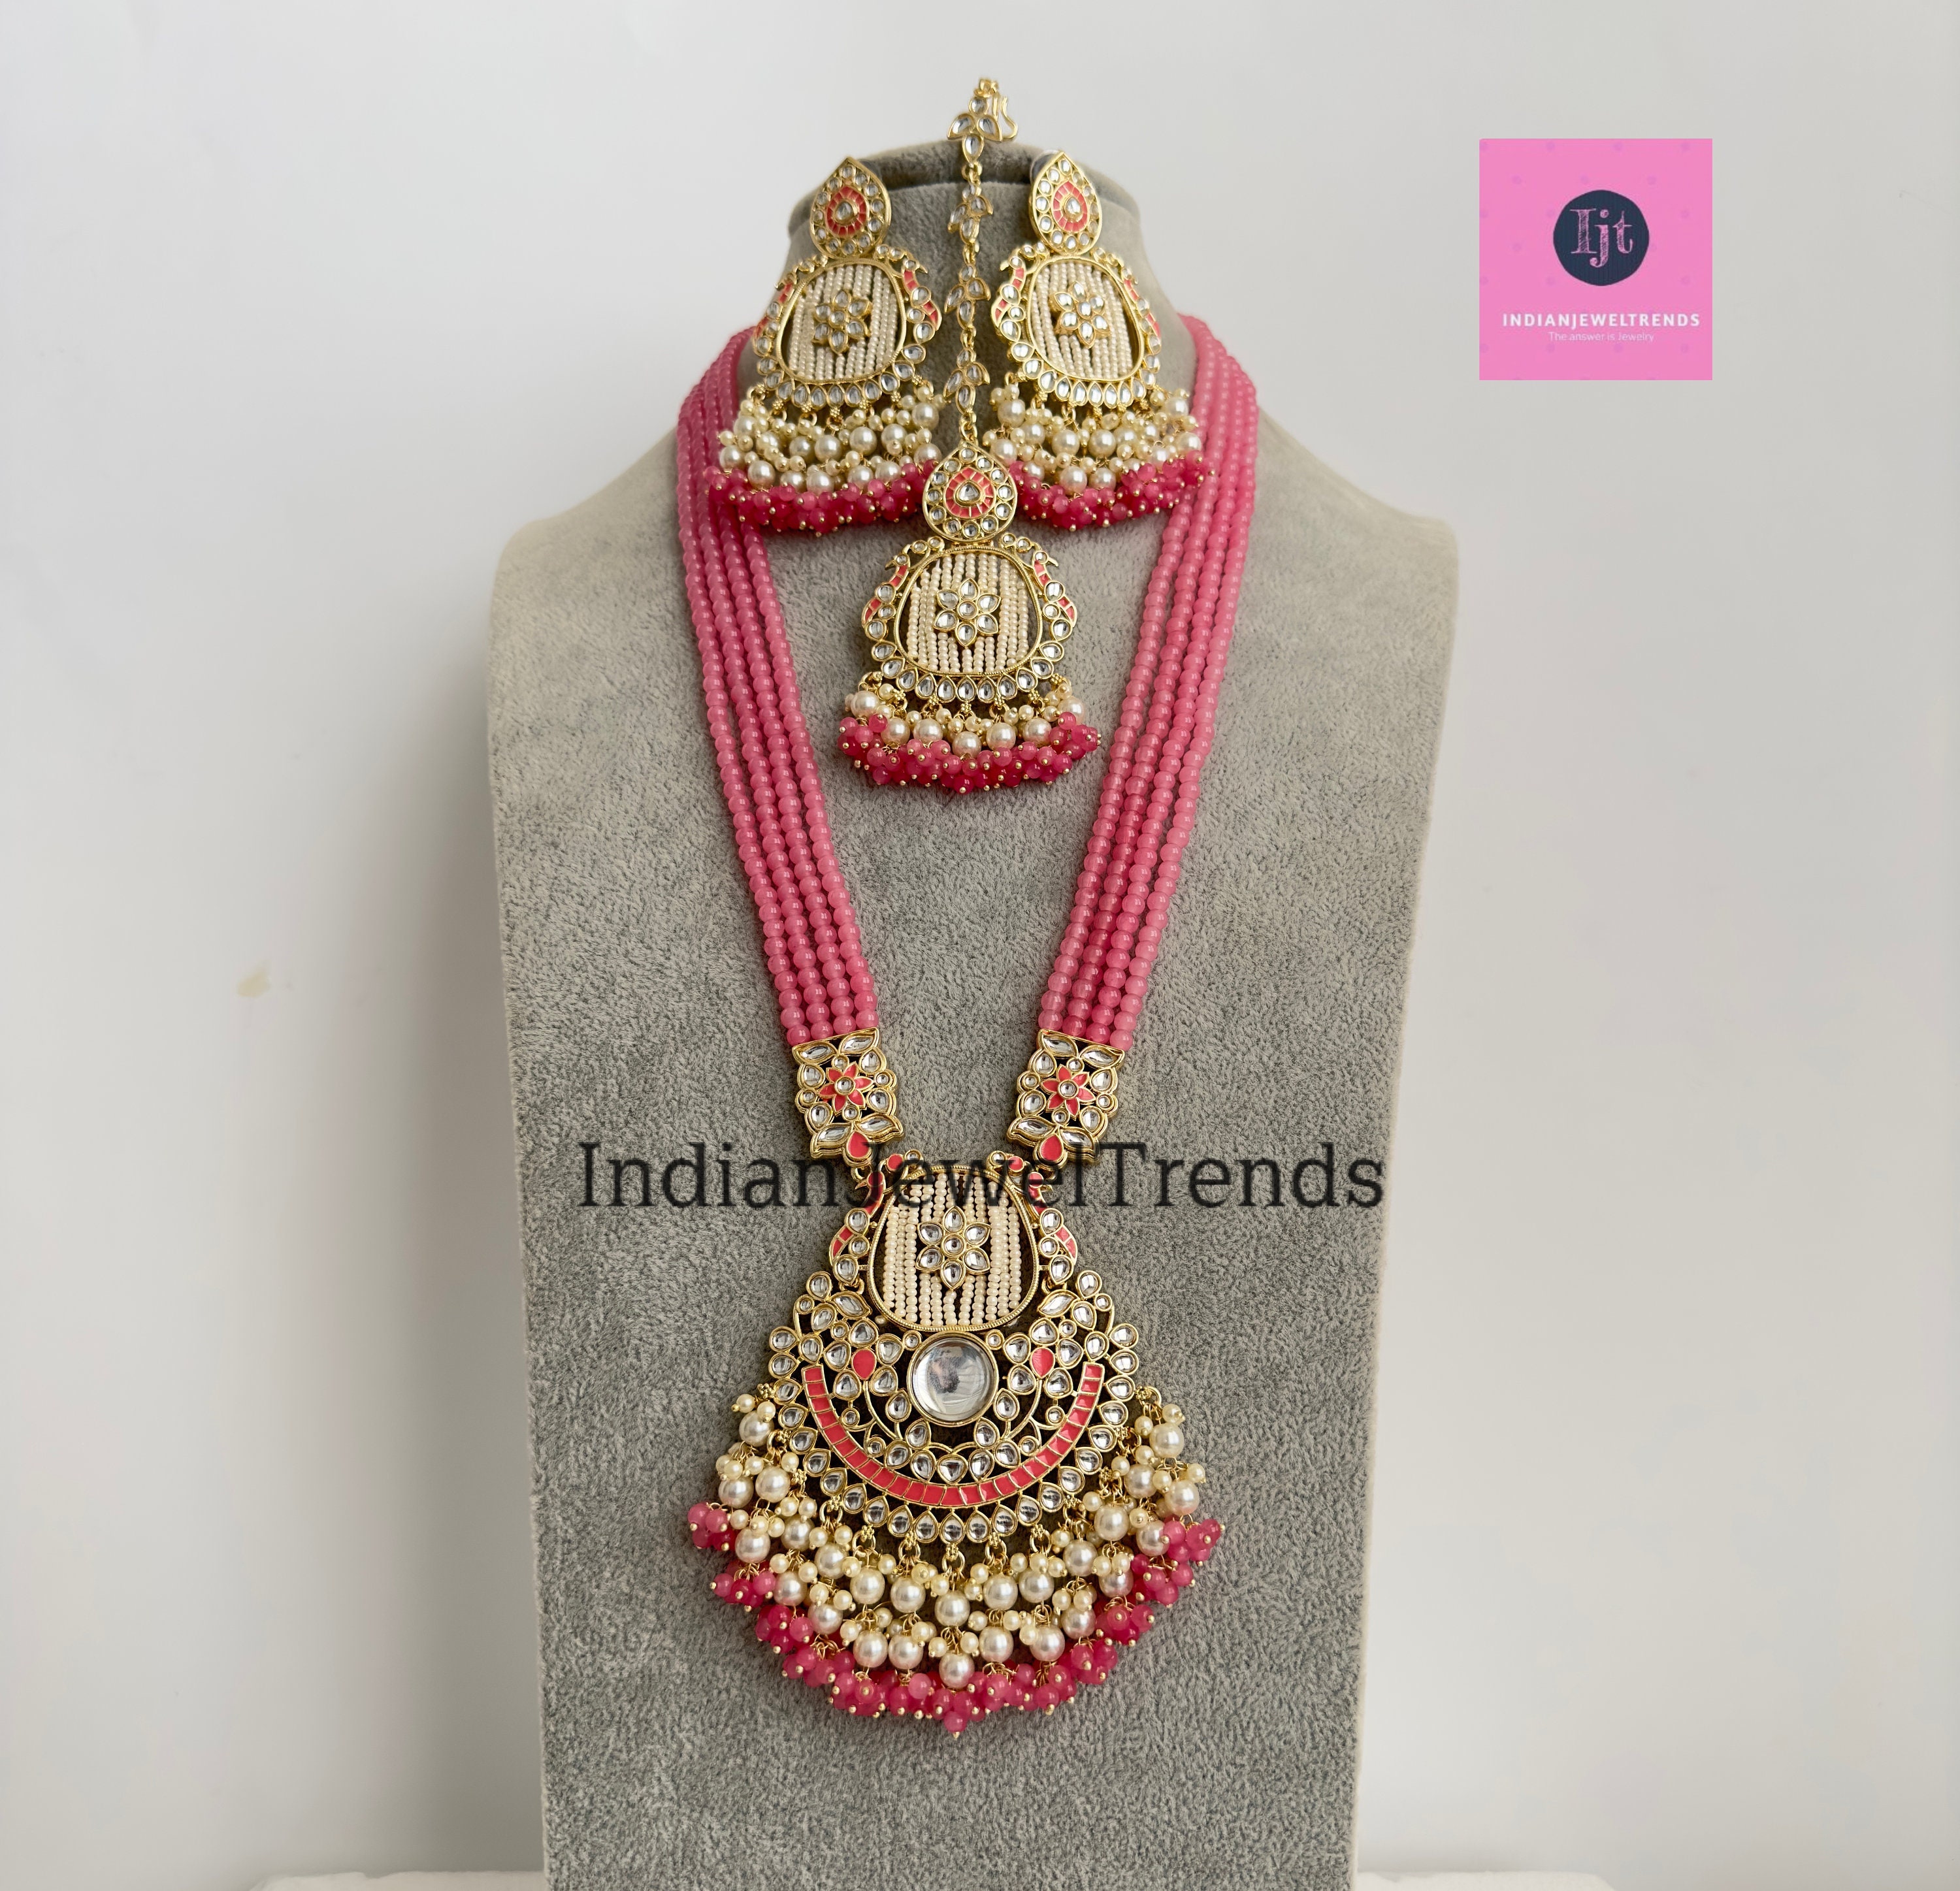 Pink Beads Long Jhumka Necklace Multi stranded Rani Haar Indian Bolly –  Indian Designs